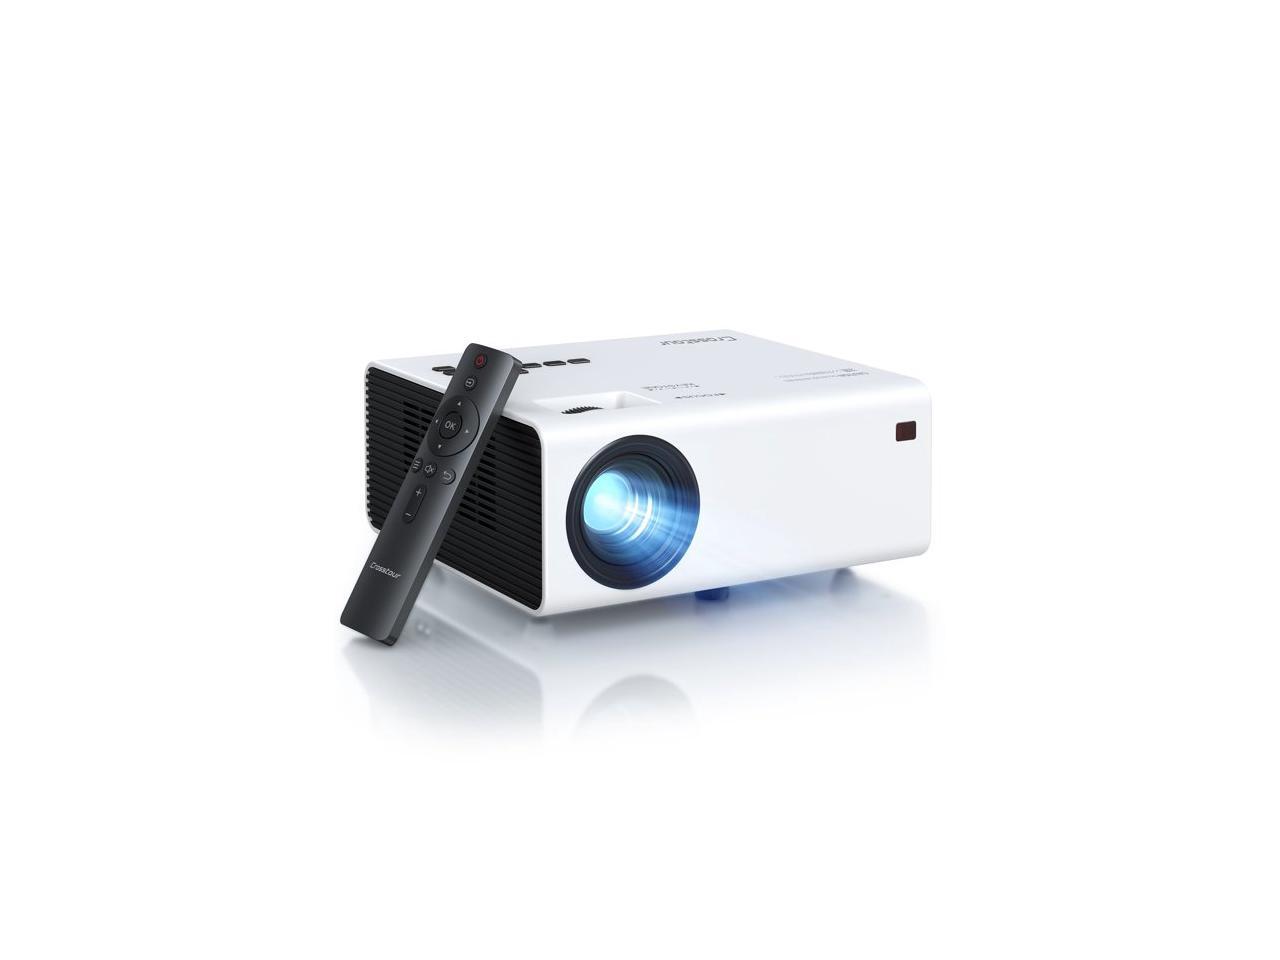 Crosstour P970 Mini Portable Projector Native 1080P Full HD Video Projector, 60000 Hrs LCD Lamp Life